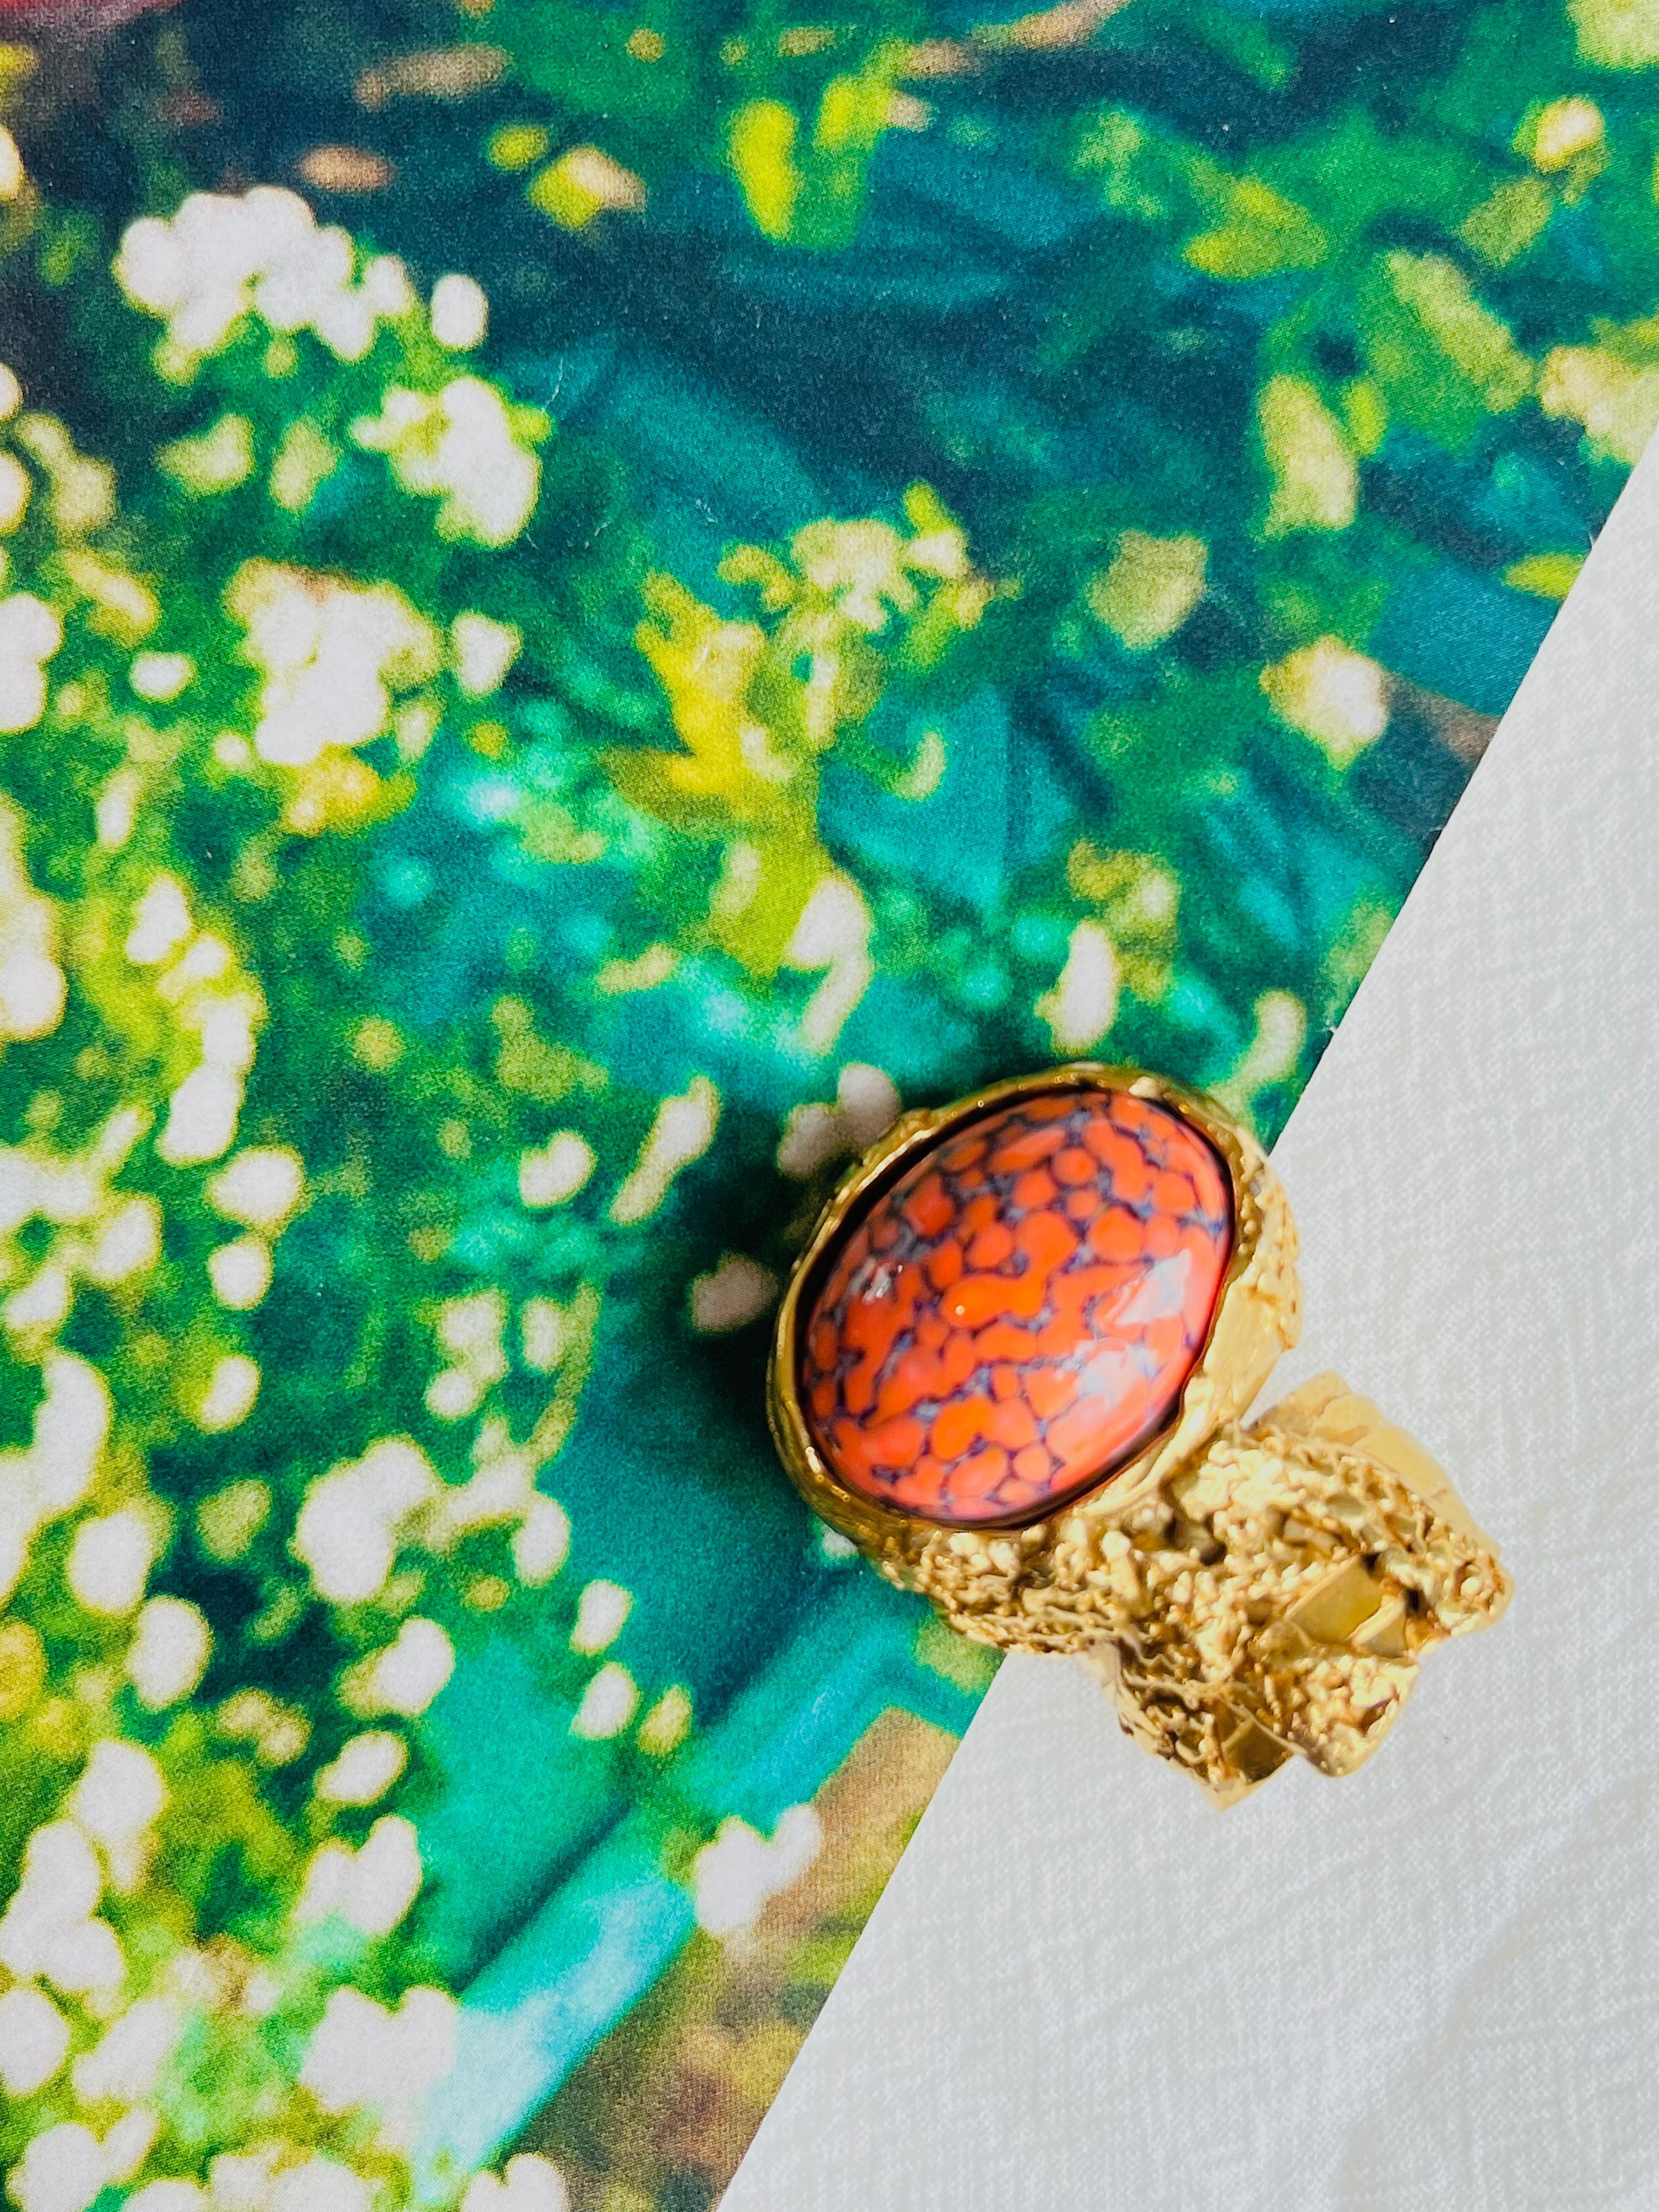 Yves Saint Laurent YSL Arty Orange Coral Cabochon Marble Chunky Ring, Size 7, Gold Plated

Very excellent condition. Vintage. 100% genuine. 

UK size: N/O.

Signed on the back YSL, Made in France.
_ _ _

Great for everyday wear. Come with velvet